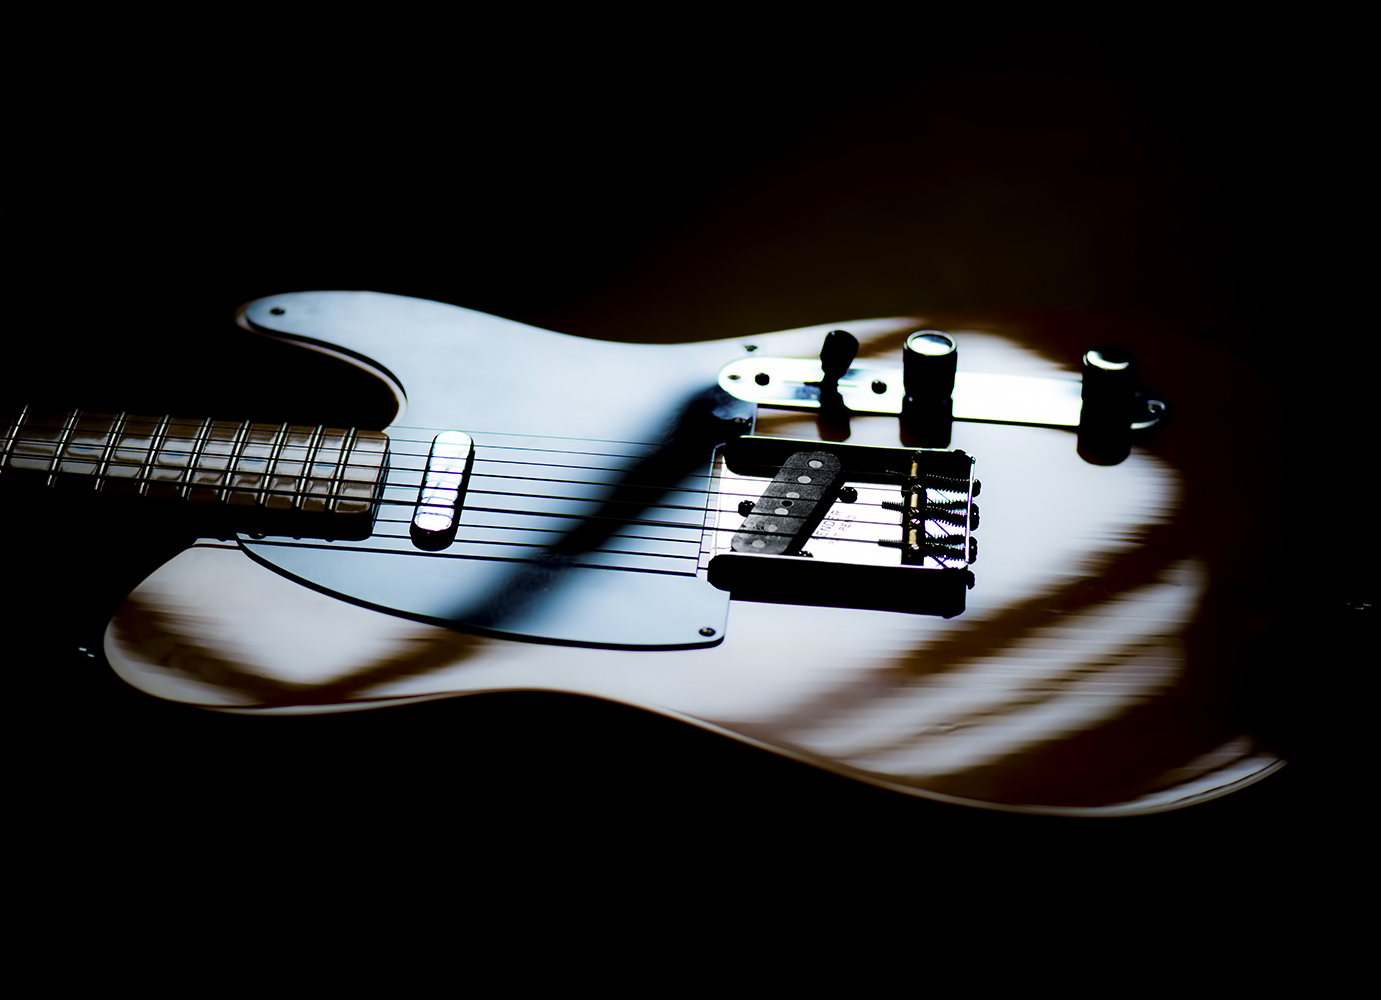 Telecaster by Dave Carter · 365 Project